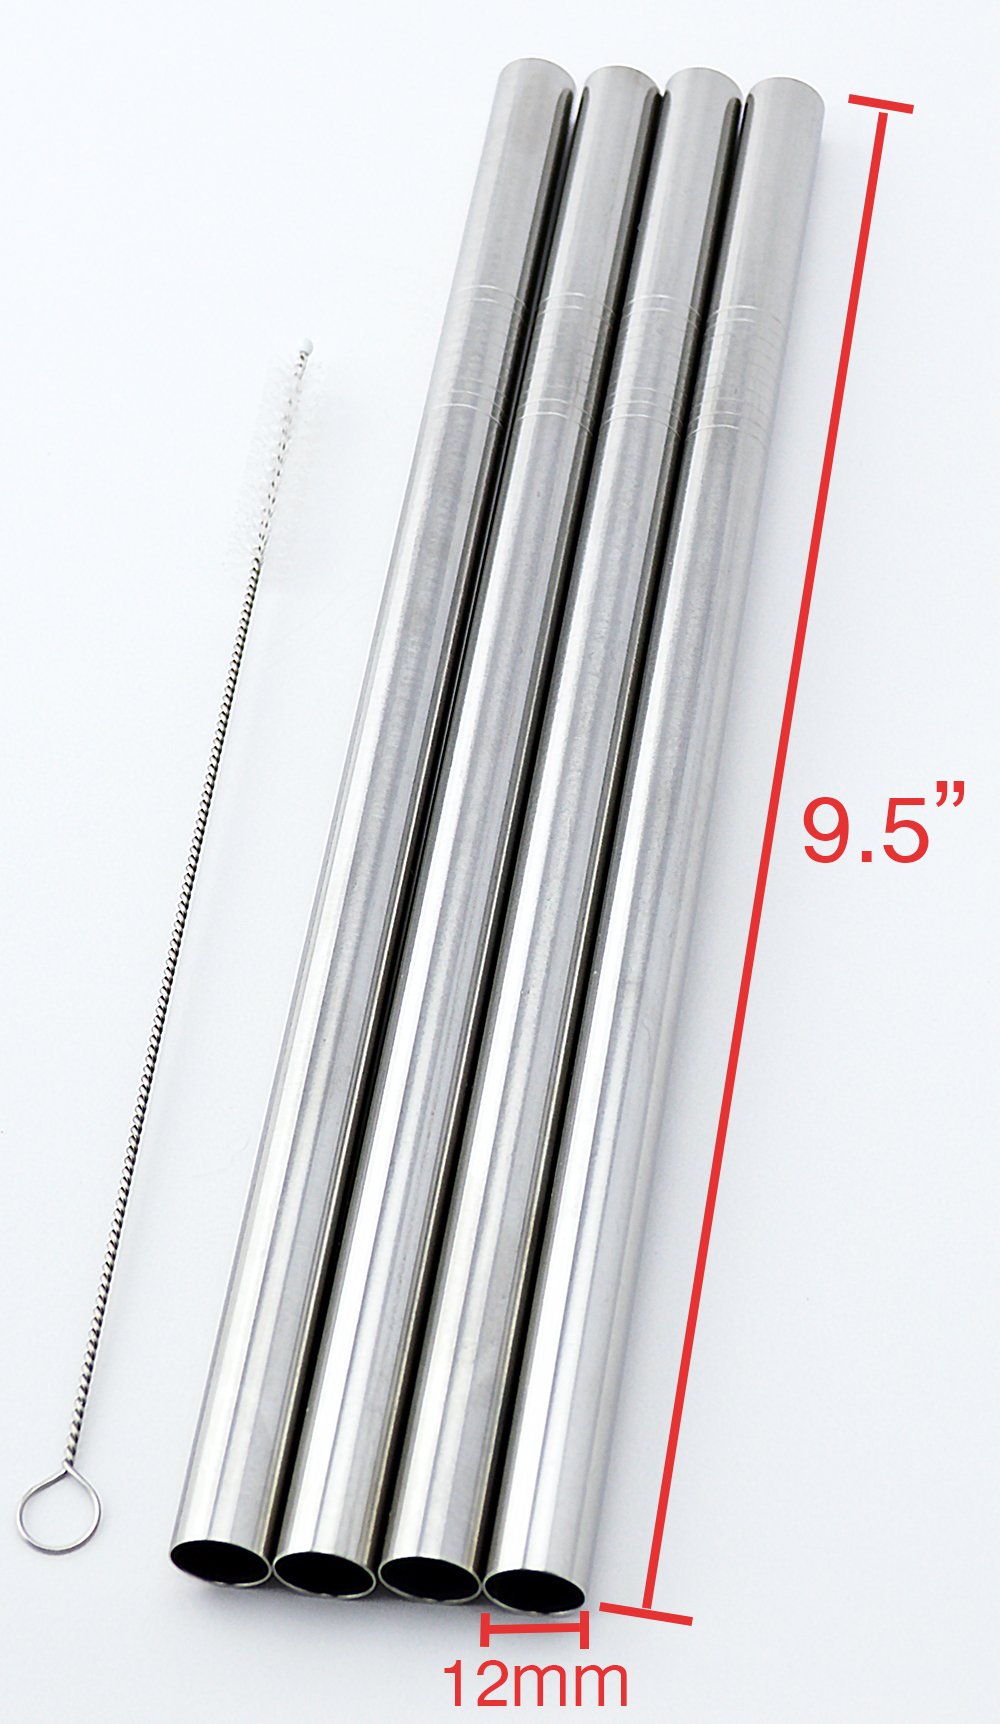 4 Stainless Steel Straws Big Straw Extra Wide 1/2" x 9.5" Long Thick FAT - CocoStraw Brand